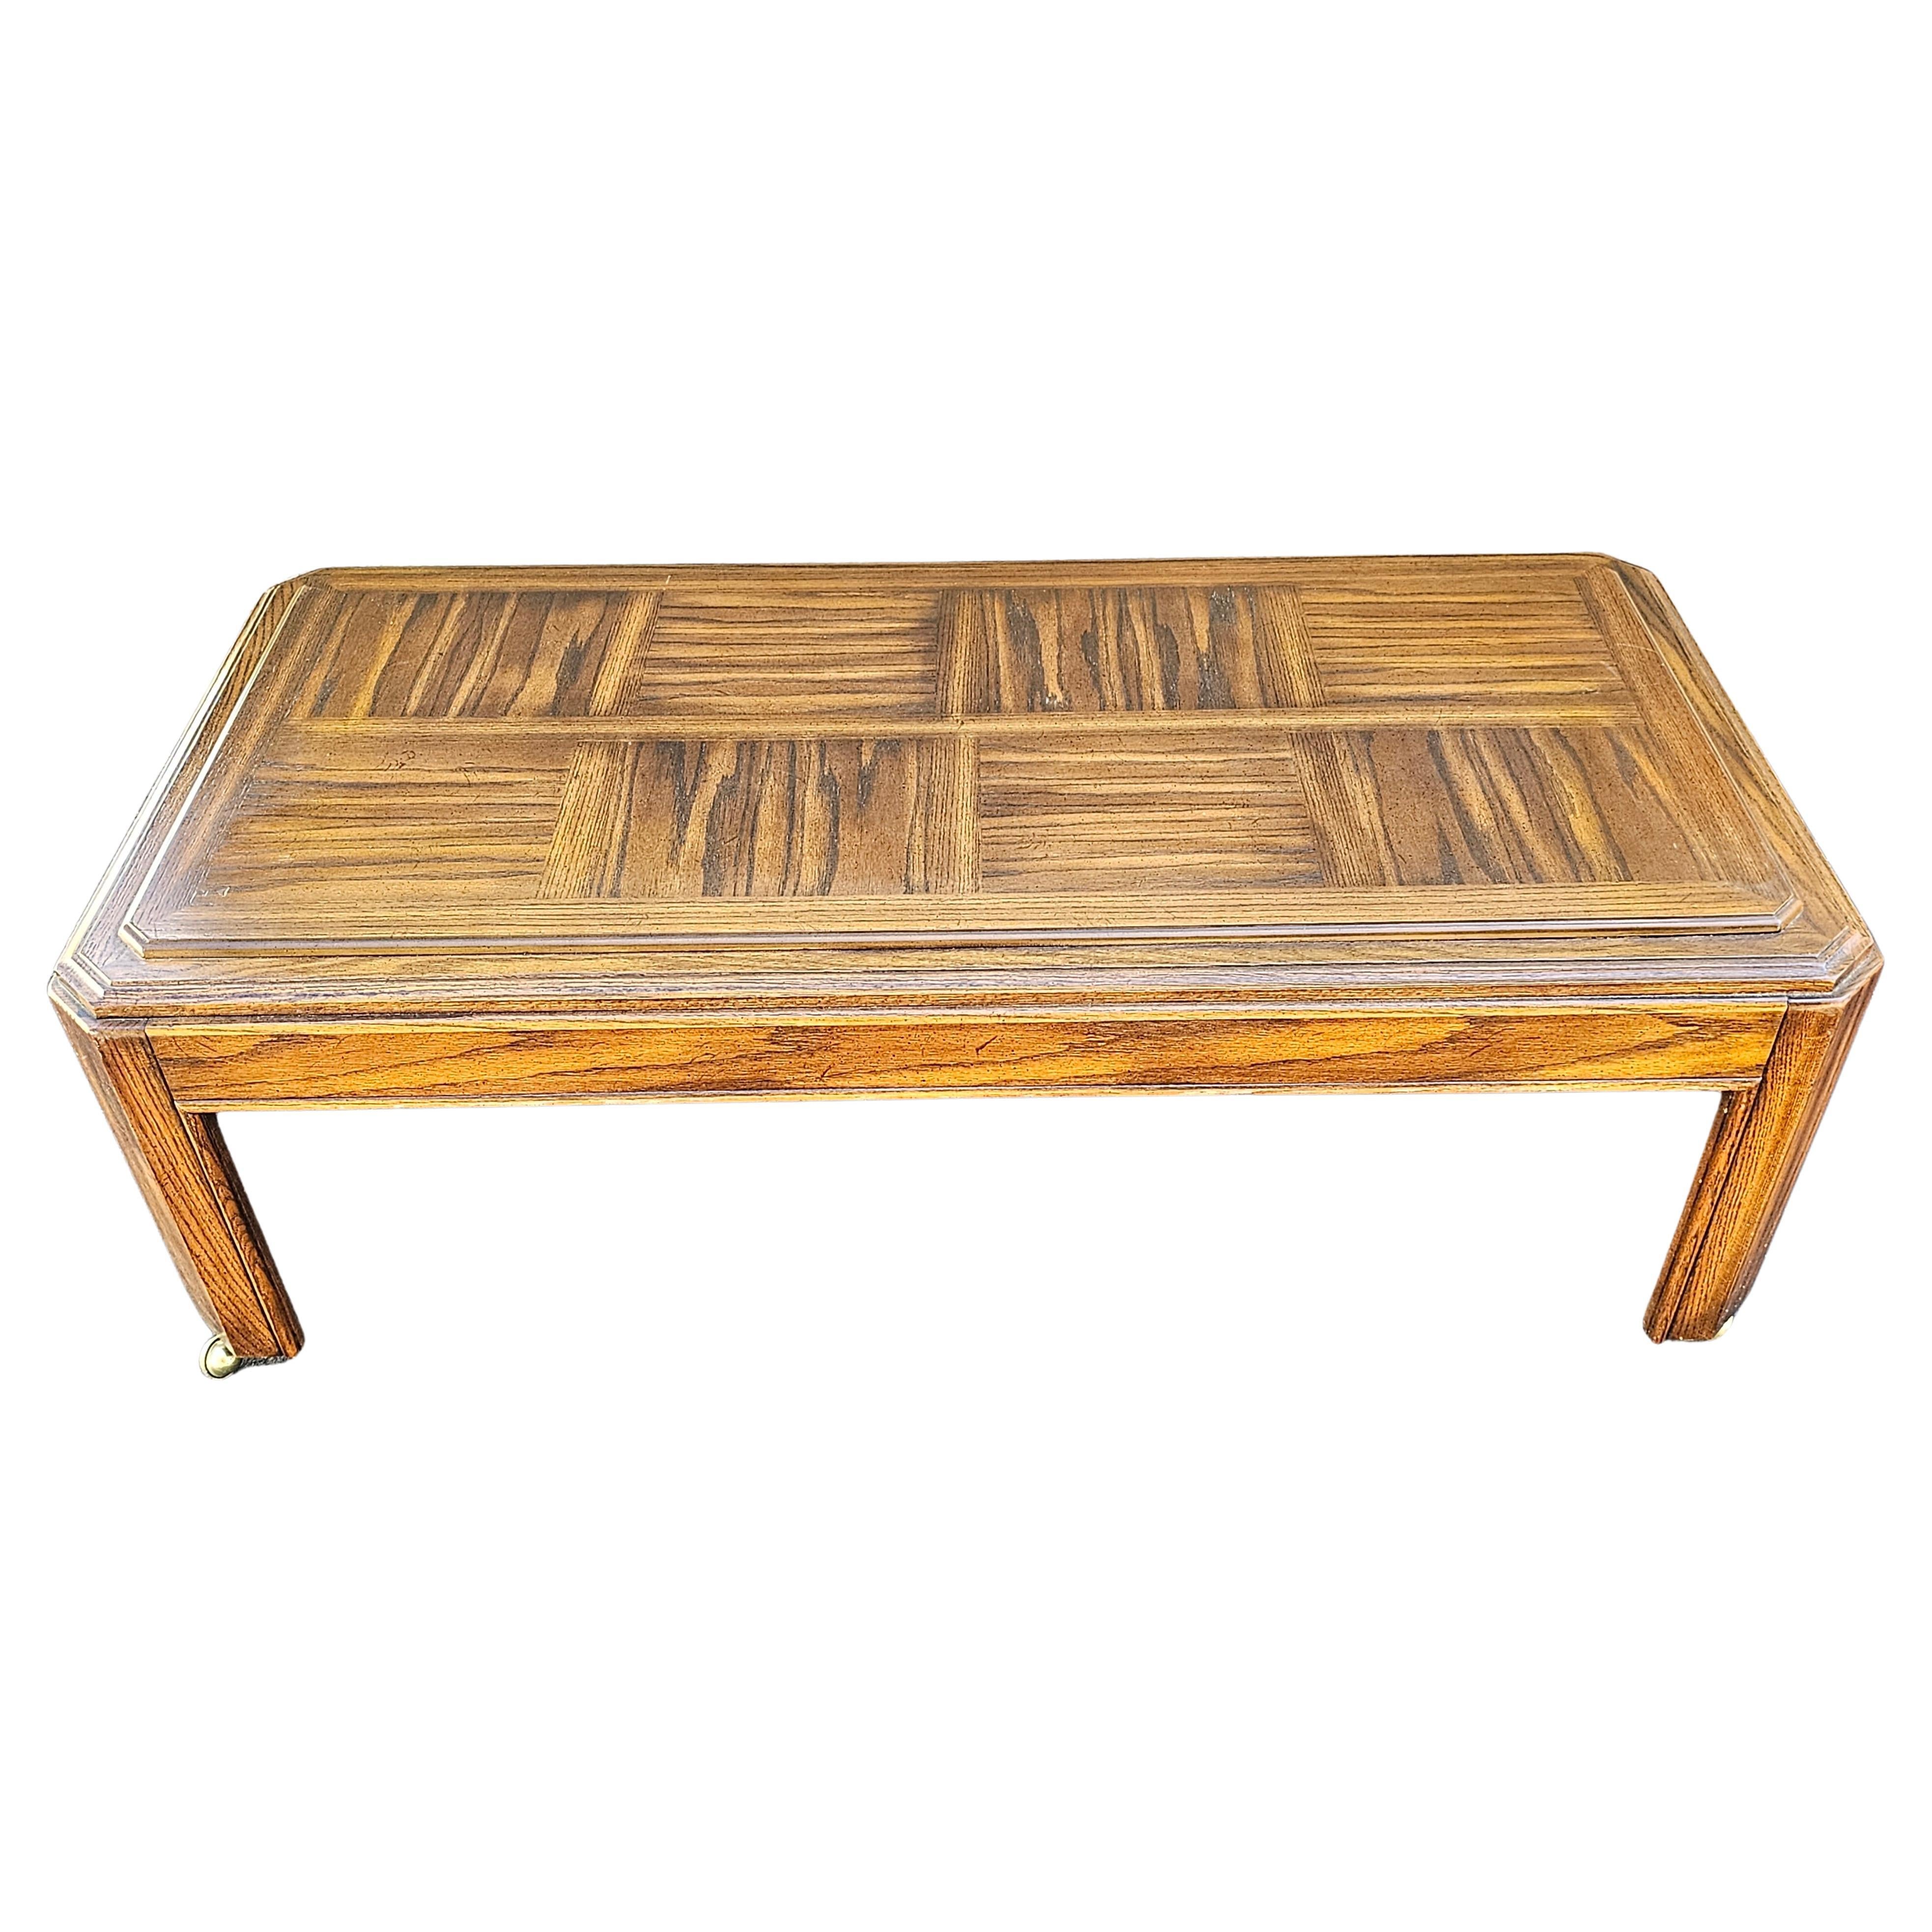 Late 20th Century Oak Parquetry Top Coffee Table on Casters For Sale